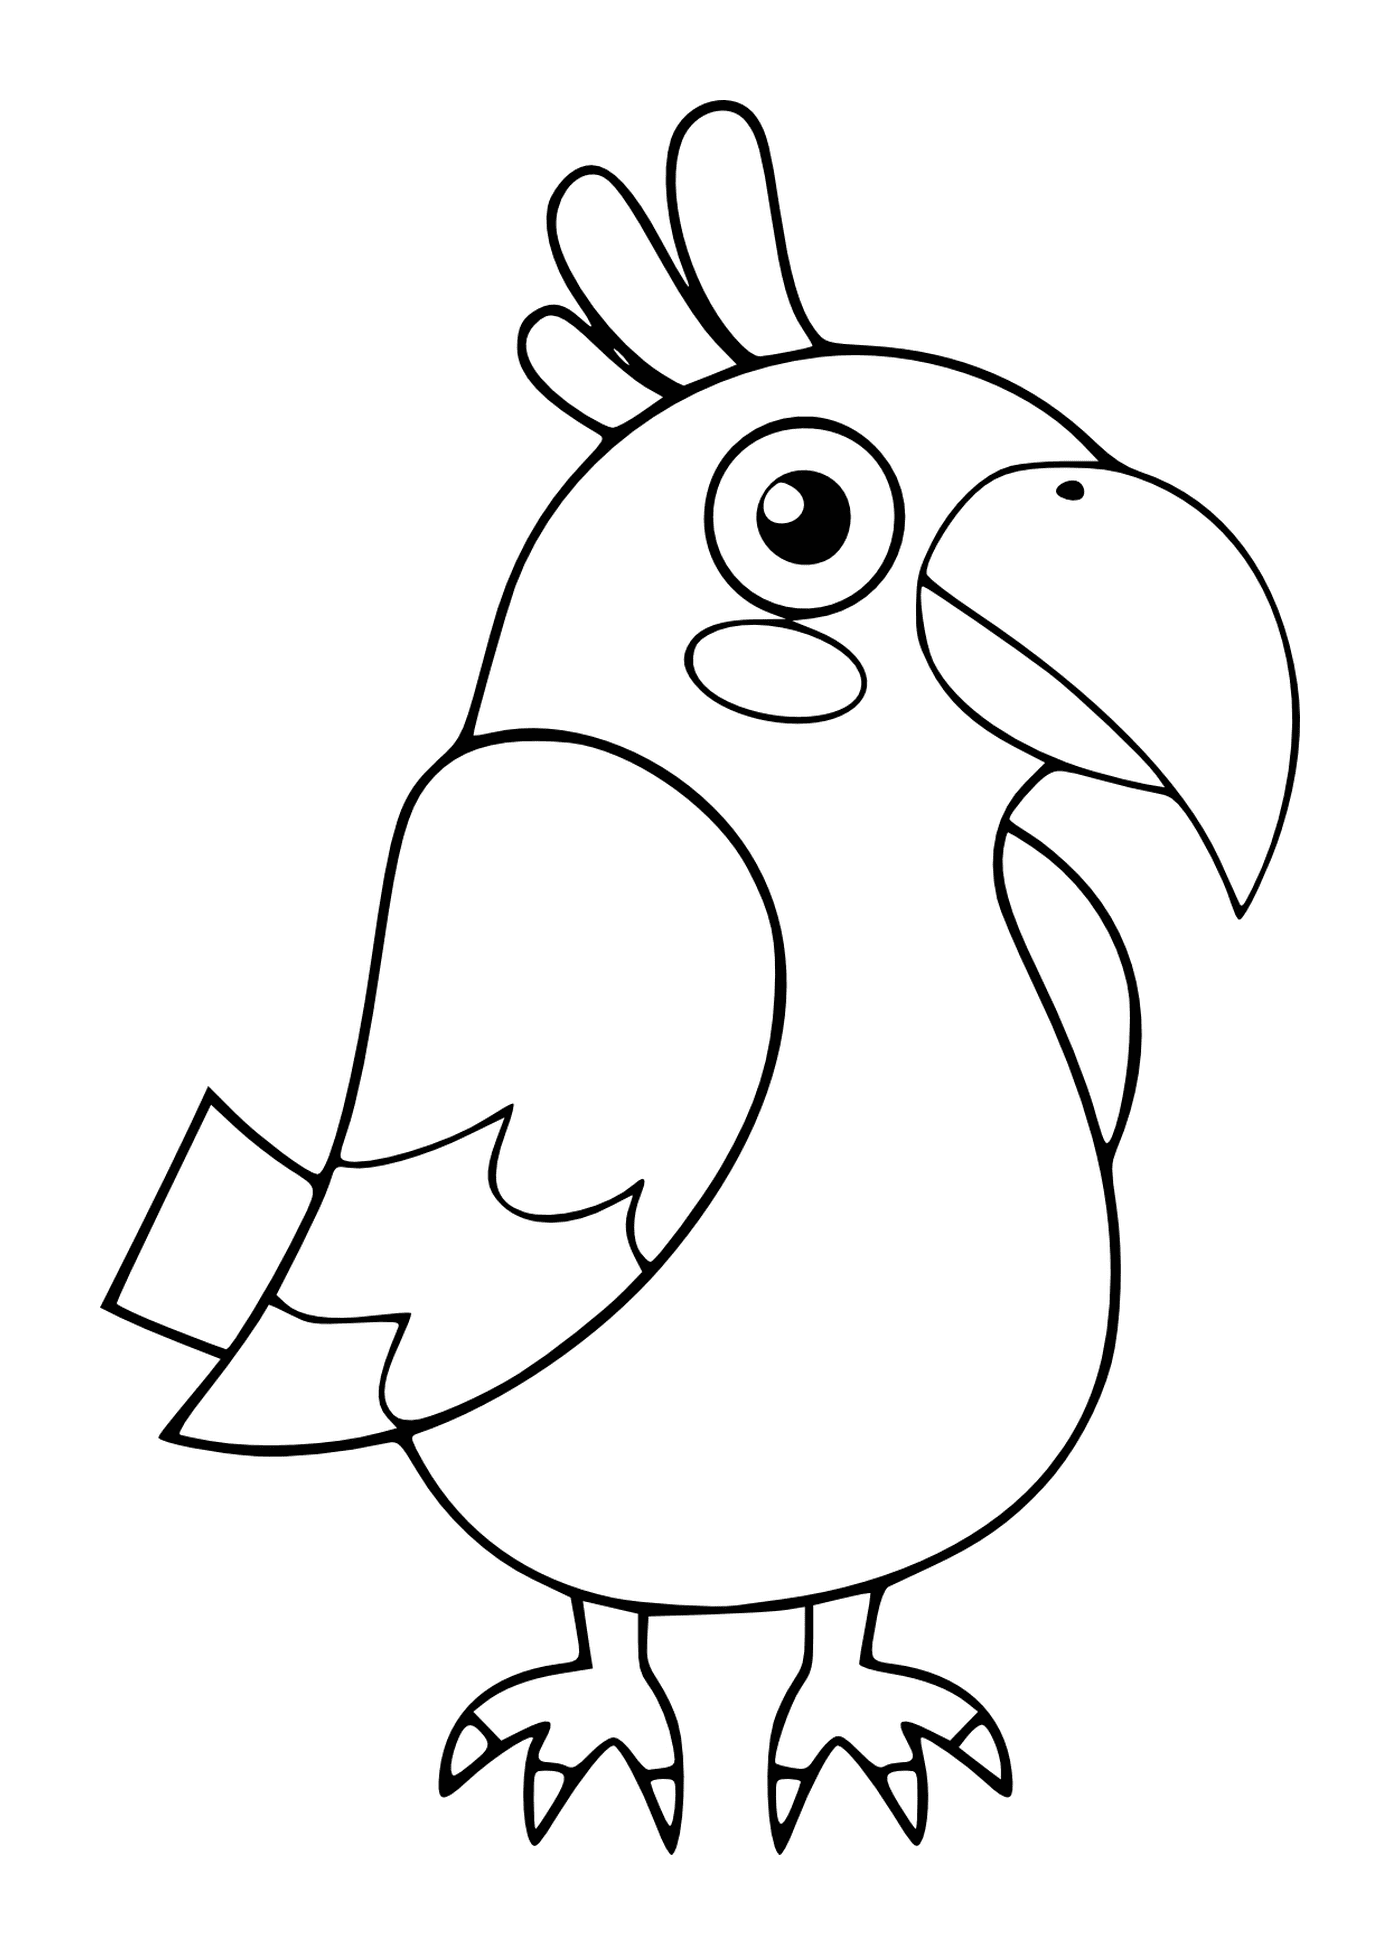  An easy to draw parrot 